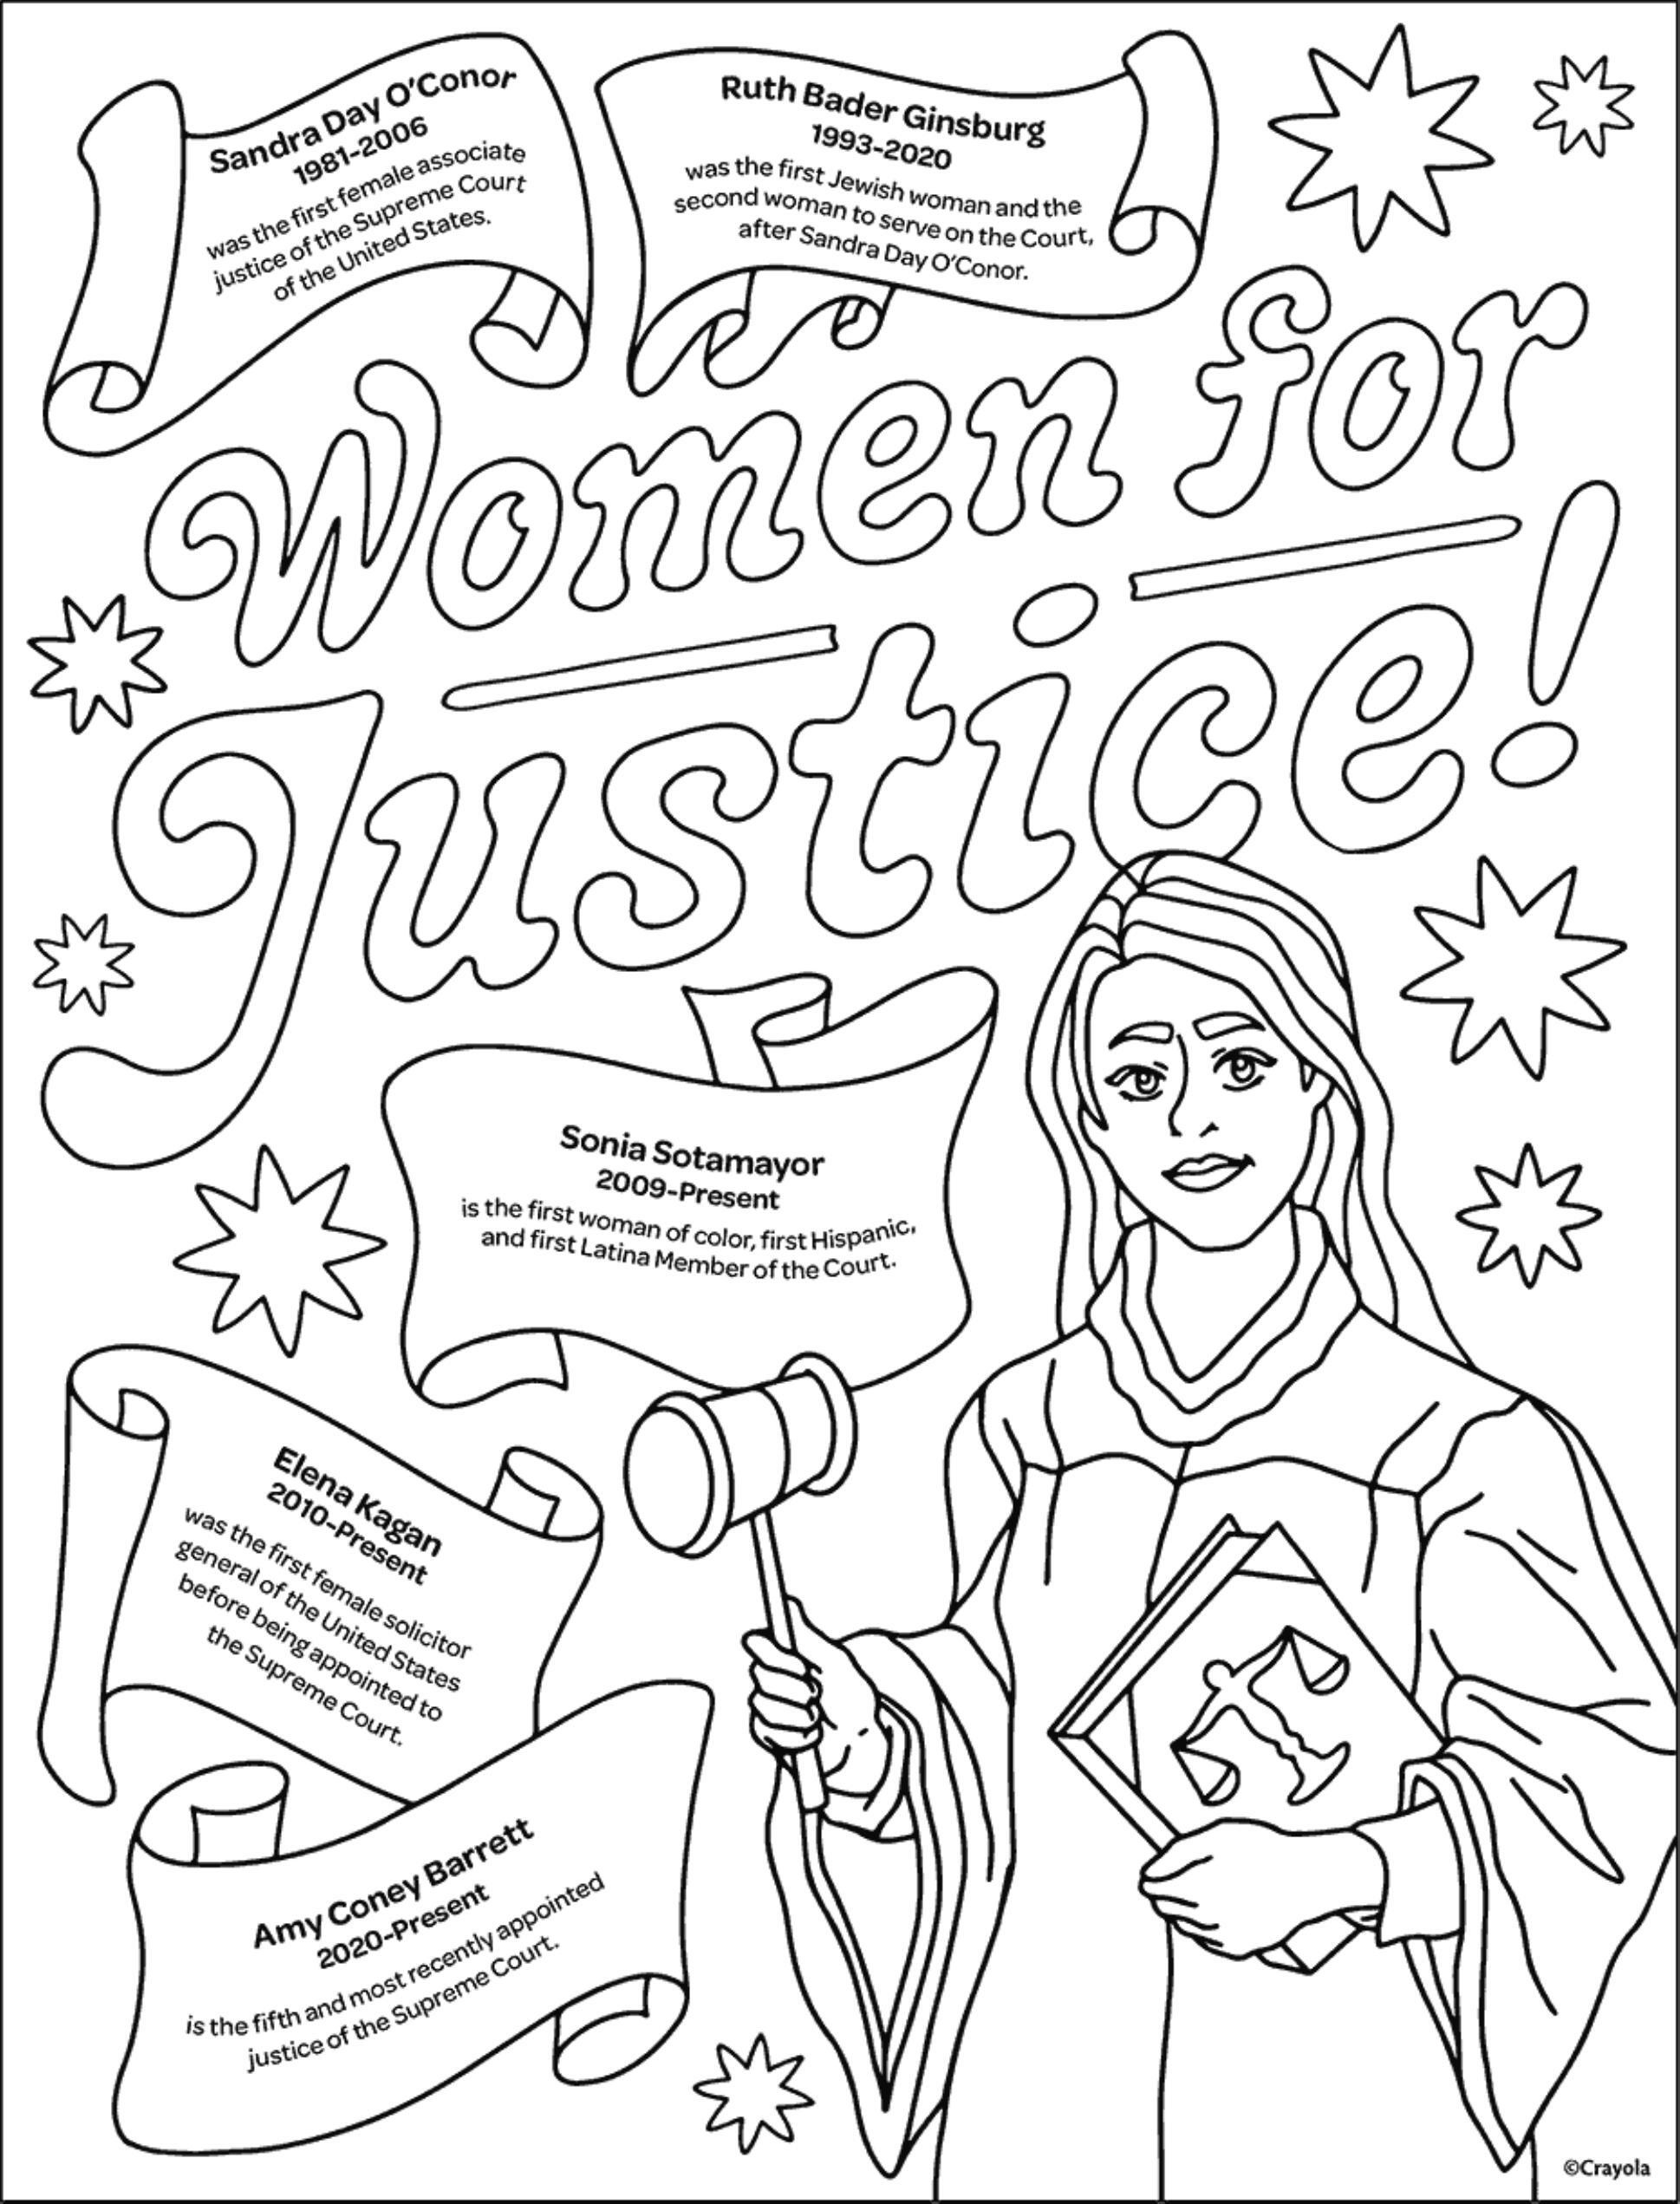 Historical Figure Women For Justice Supreme Court